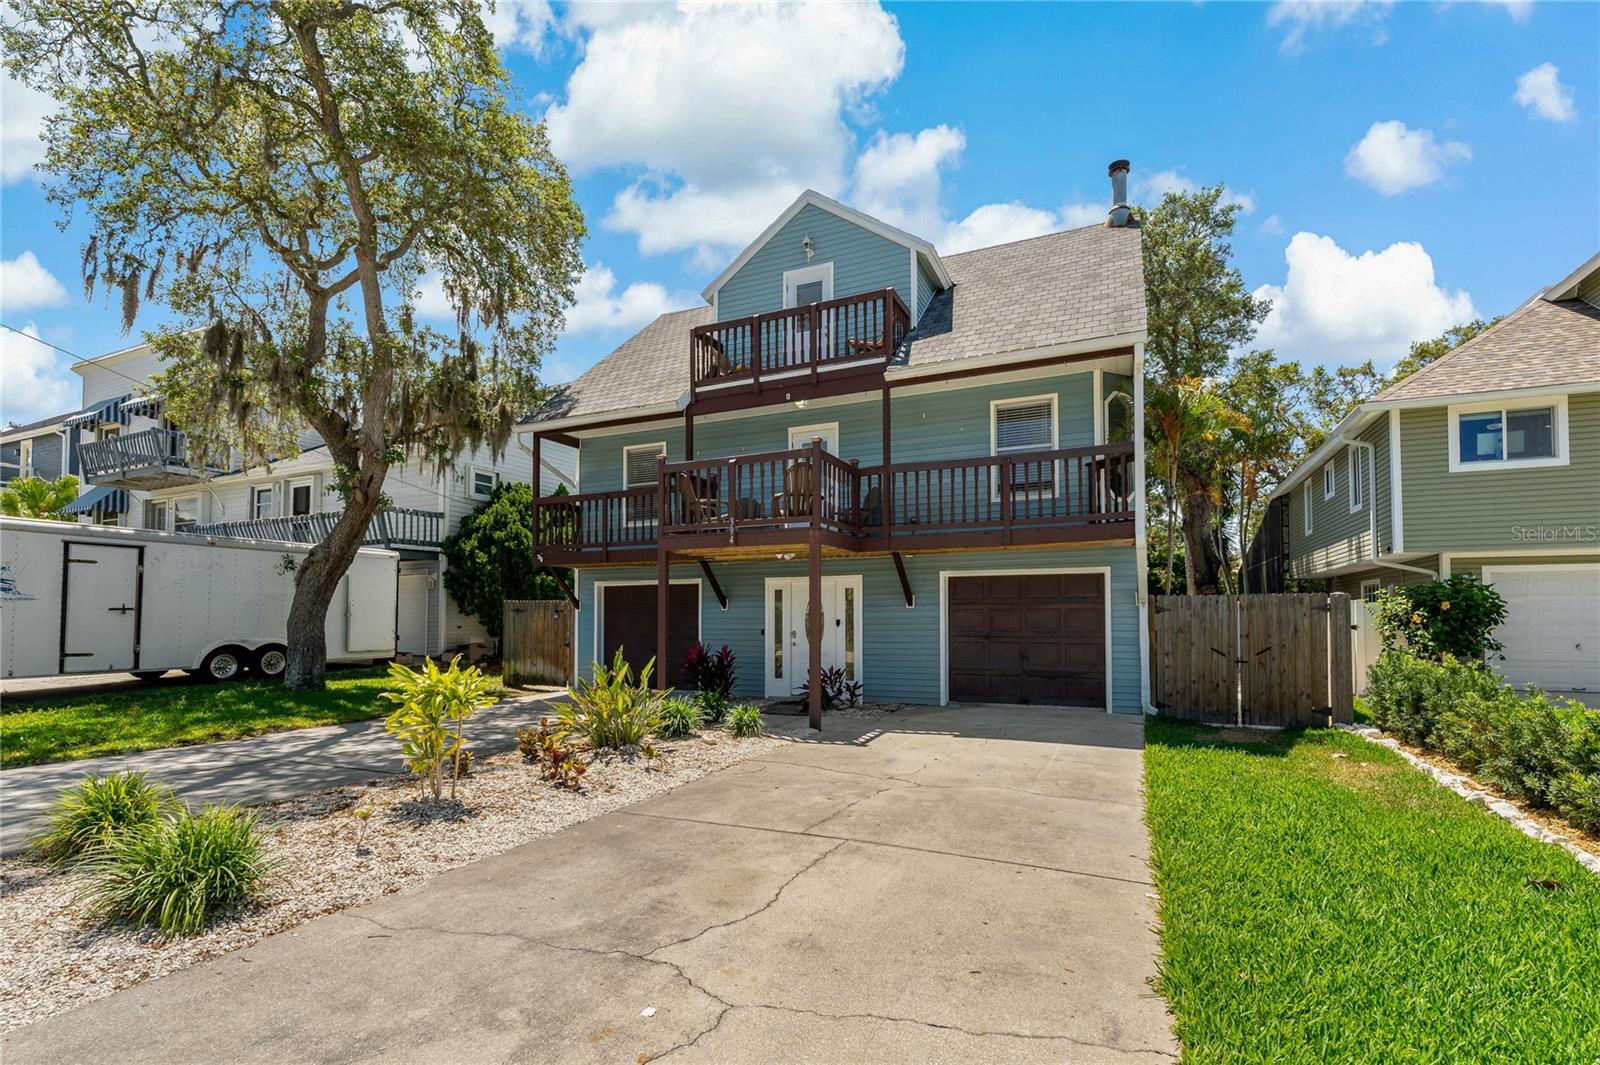 BEAUTIFUL HOME IN THE HIGHLY DESIRABLE CRYSTAL BEACH COMMUNITY!